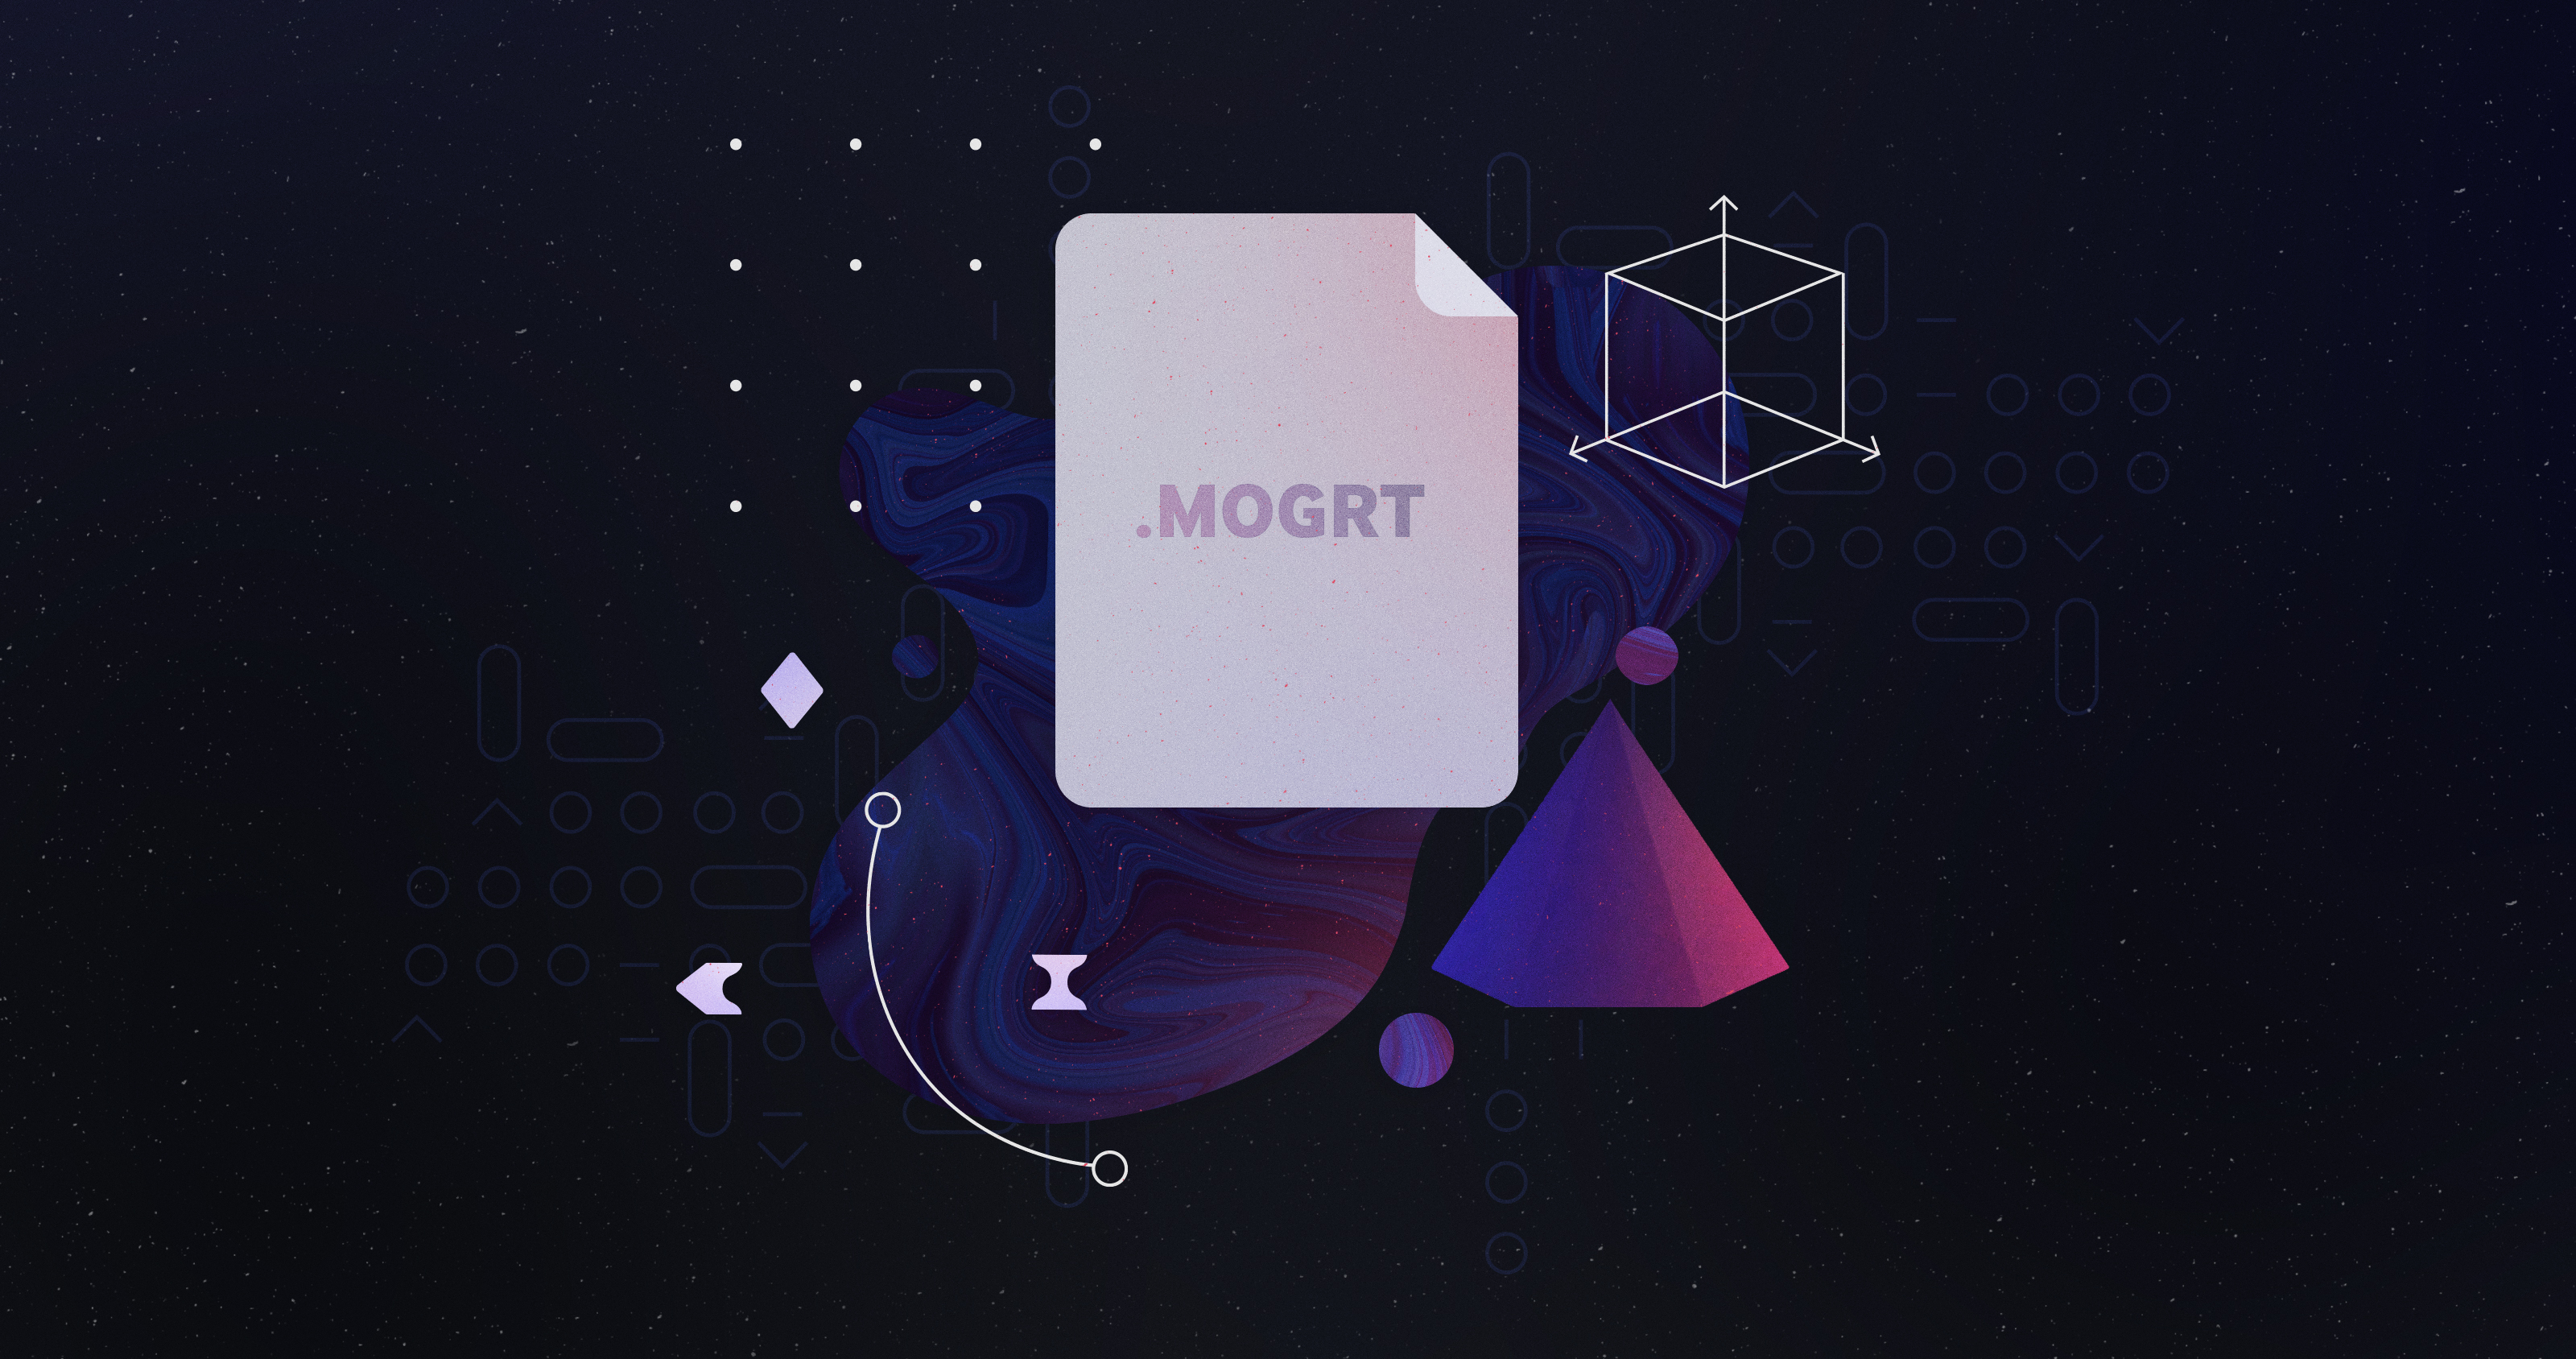 Be More Creative, Efficient, and Profitable with Adobe MOGRTs.